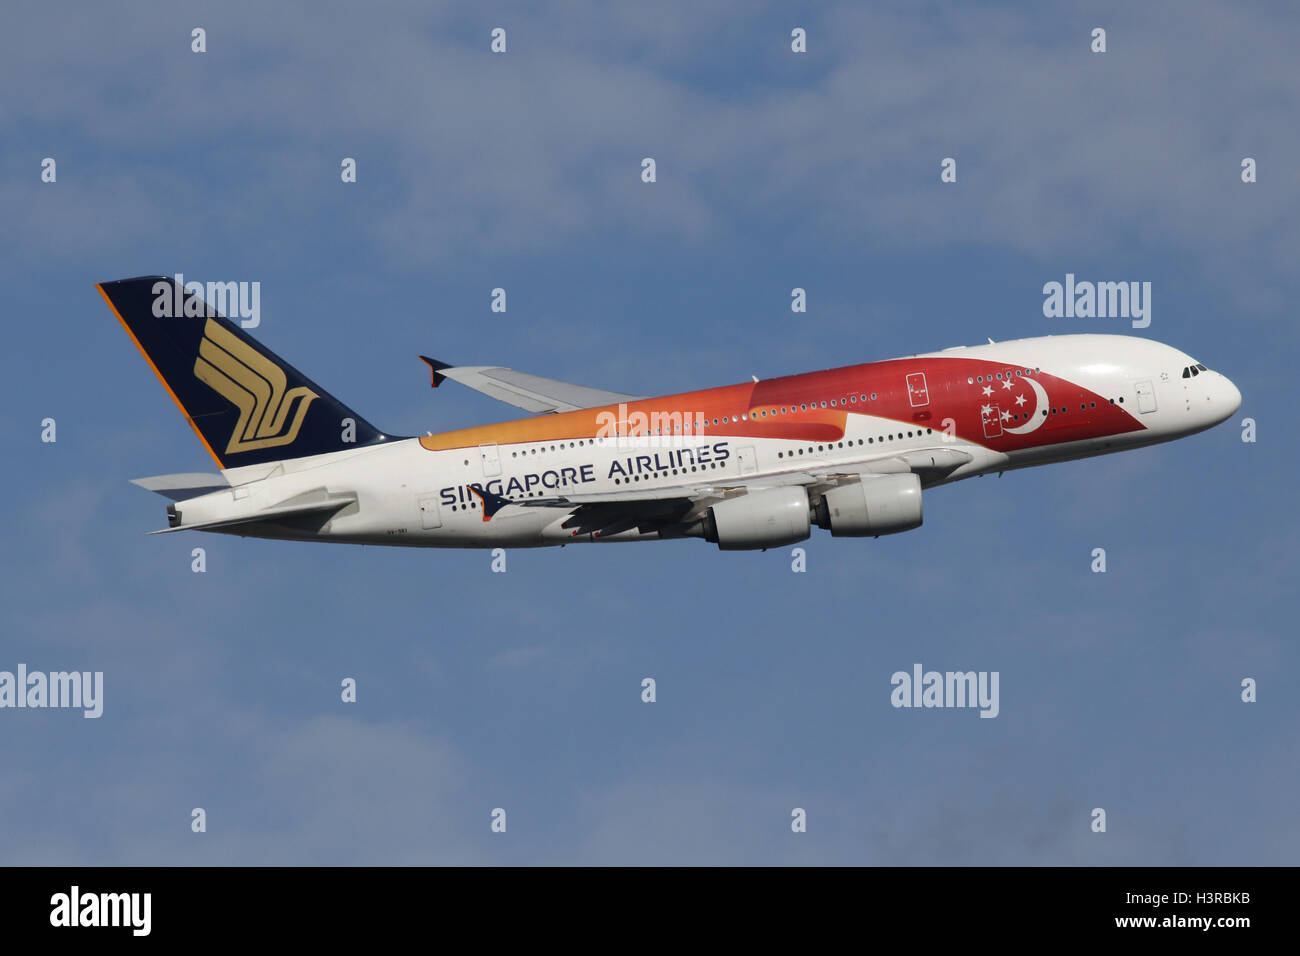 SINGAPORE AIRLINES A380 Stockfoto